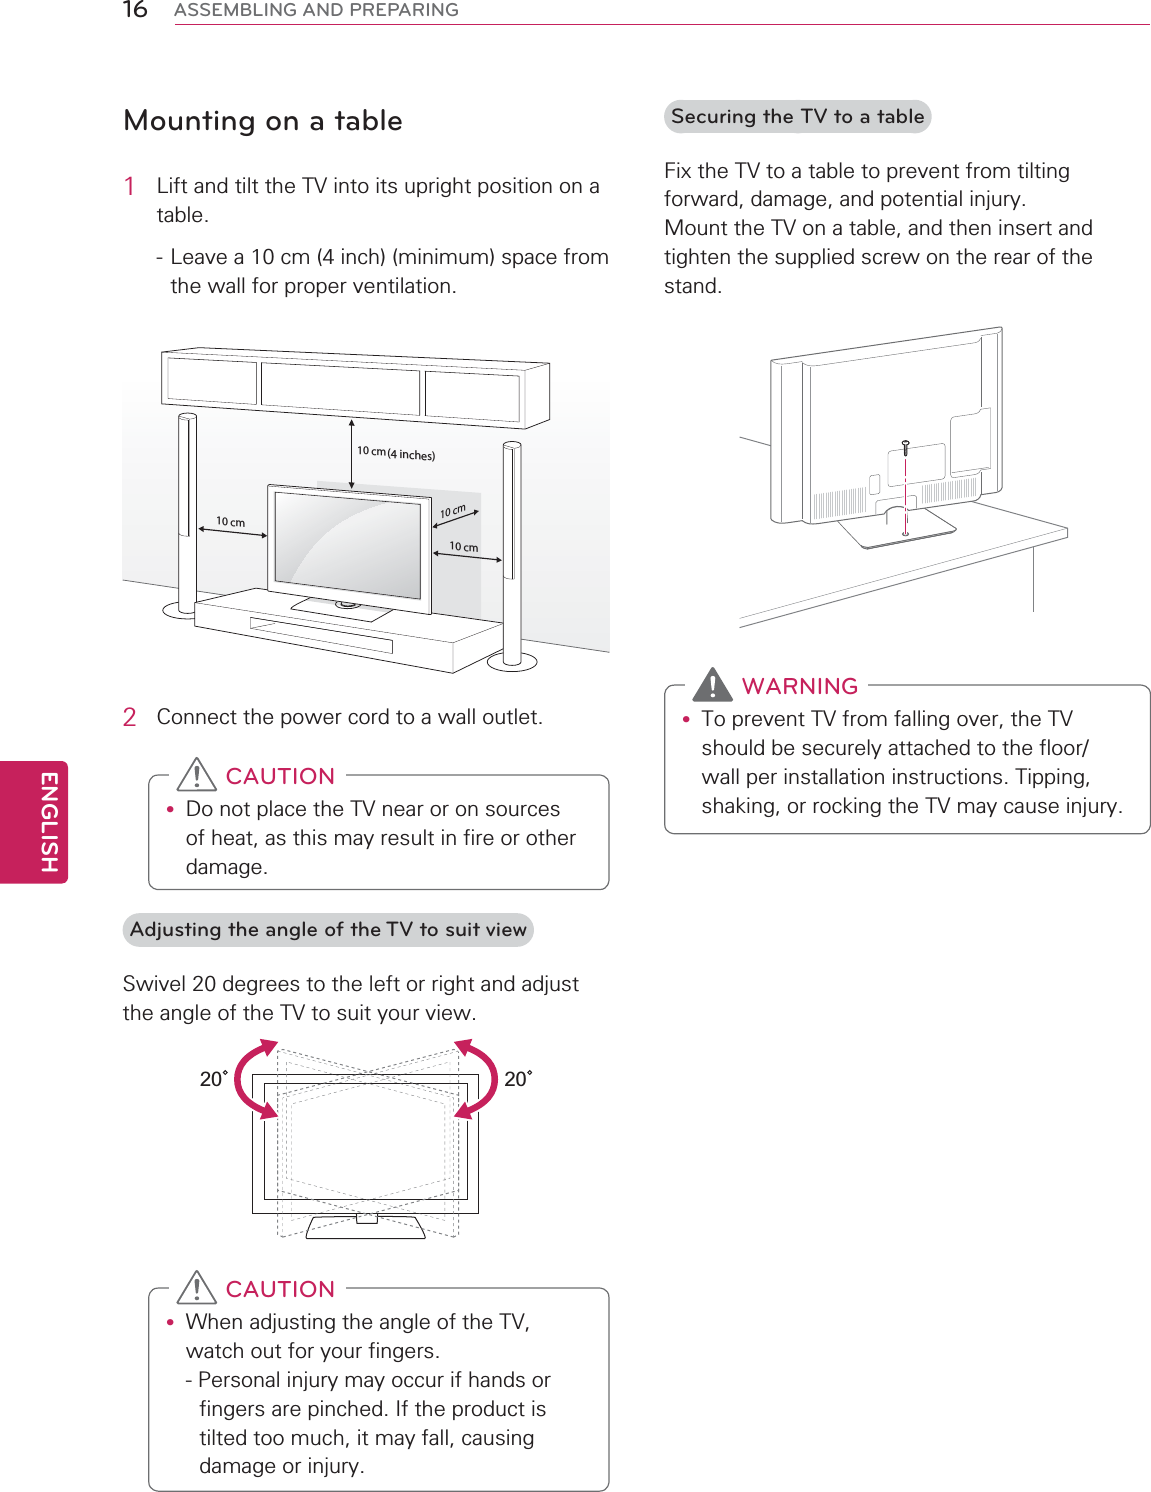 ENGLISH16 ASSEMBLING AND PREPARINGMounting on a table1  Lift and tilt the TV into its upright position on a table.- Leave a 10 cm (4 inch) (minimum) space from the wall for proper ventilation.10 cm10 cm10 cm10 cm(4 inches)2  Connect the power cord to a wall outlet.y Do not place the TV near or on sources of heat, as this may result in fire or other damage. CAUTIONAdjusting the angle of the TV to suit viewSwivel 20 degrees to the left or right and adjust the angle of the TV to suit your view.2020y When adjusting the angle of the TV, watch out for your fingers.- Personal injury may occur if hands or fingers are pinched. If the product is tilted too much, it may fall, causing damage or injury. CAUTIONSecuring the TV to a tableFix the TV to a table to prevent from tilting forward, damage, and potential injury. Mount the TV on a table, and then insert and tighten the supplied screw on the rear of the stand.y To prevent TV from falling over, the TV should be securely attached to the floor/wall per installation instructions. Tipping, shaking, or rocking the TV may cause injury. WARNING